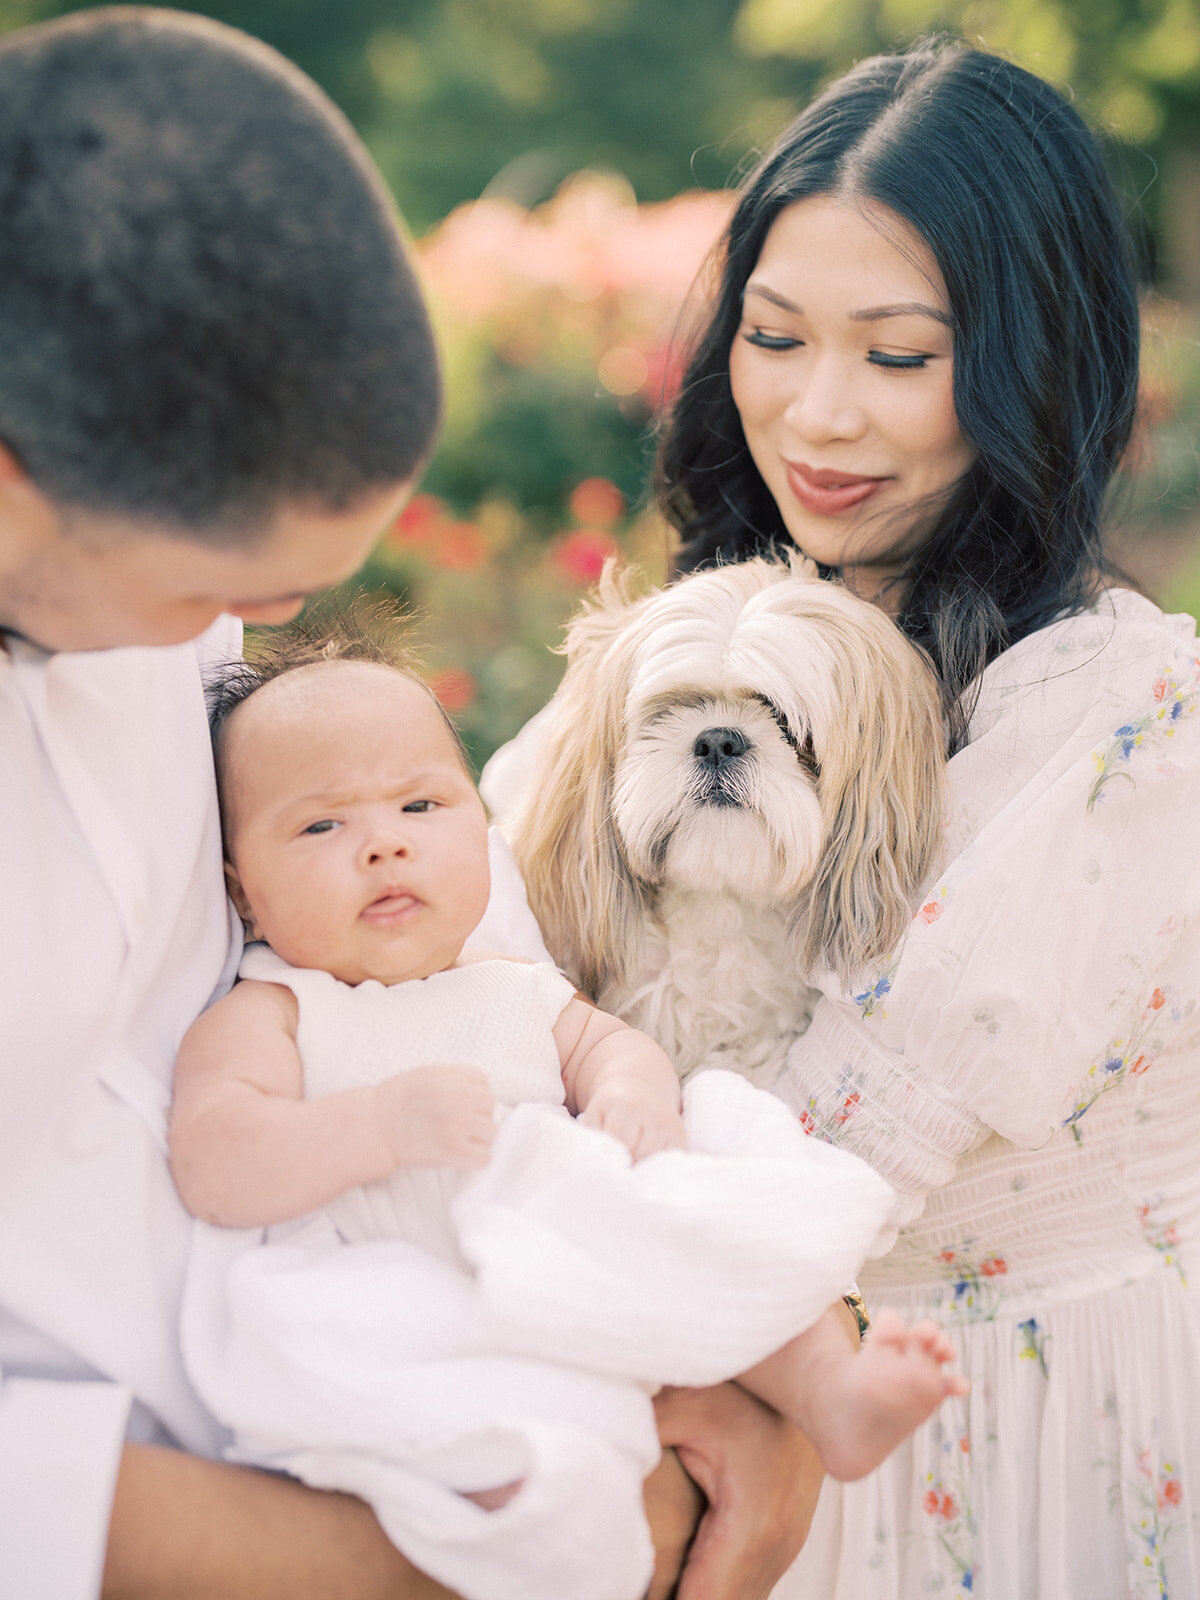 Baby girl is held by her father as her mother stands next to her holding their small family dog in a rose garden.